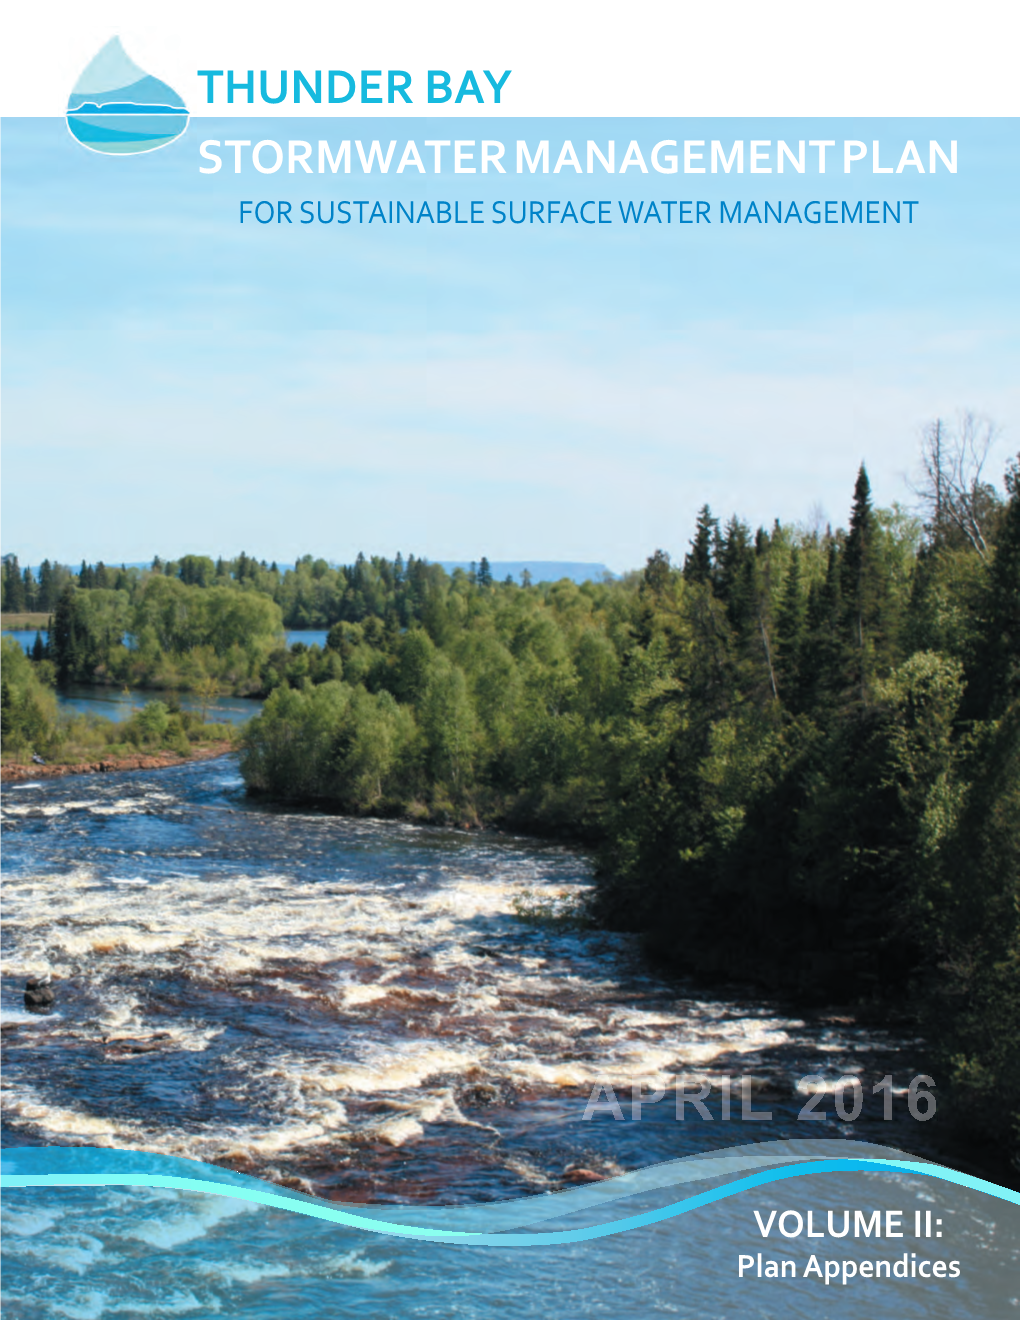 Thunder Bay Stormwater Management Plan for Sustainable Surface Water Management